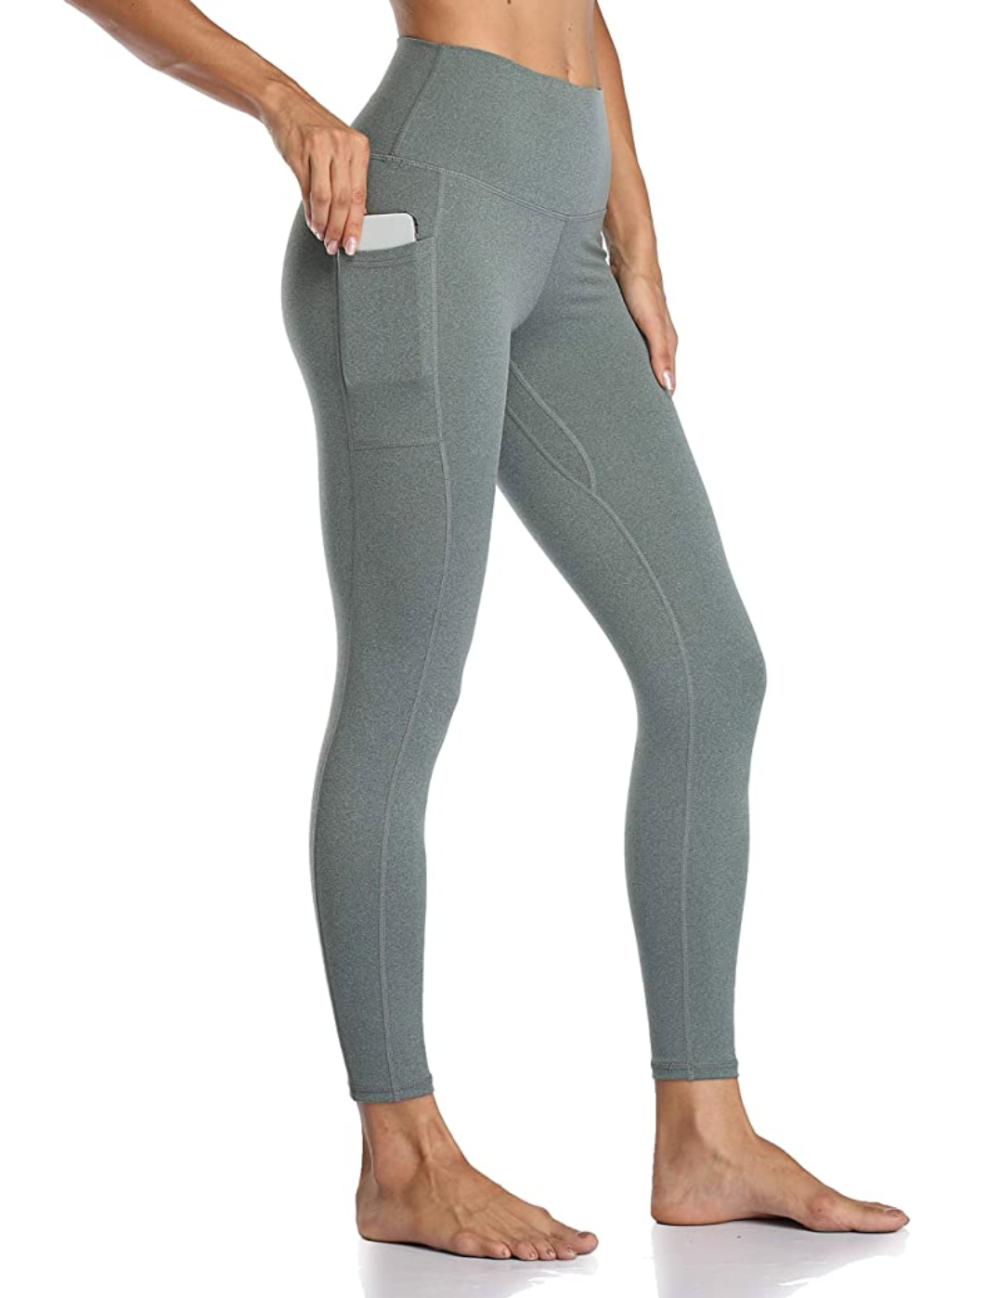 Shoppers Keep Comparing These $25 Leggings to Top Brands